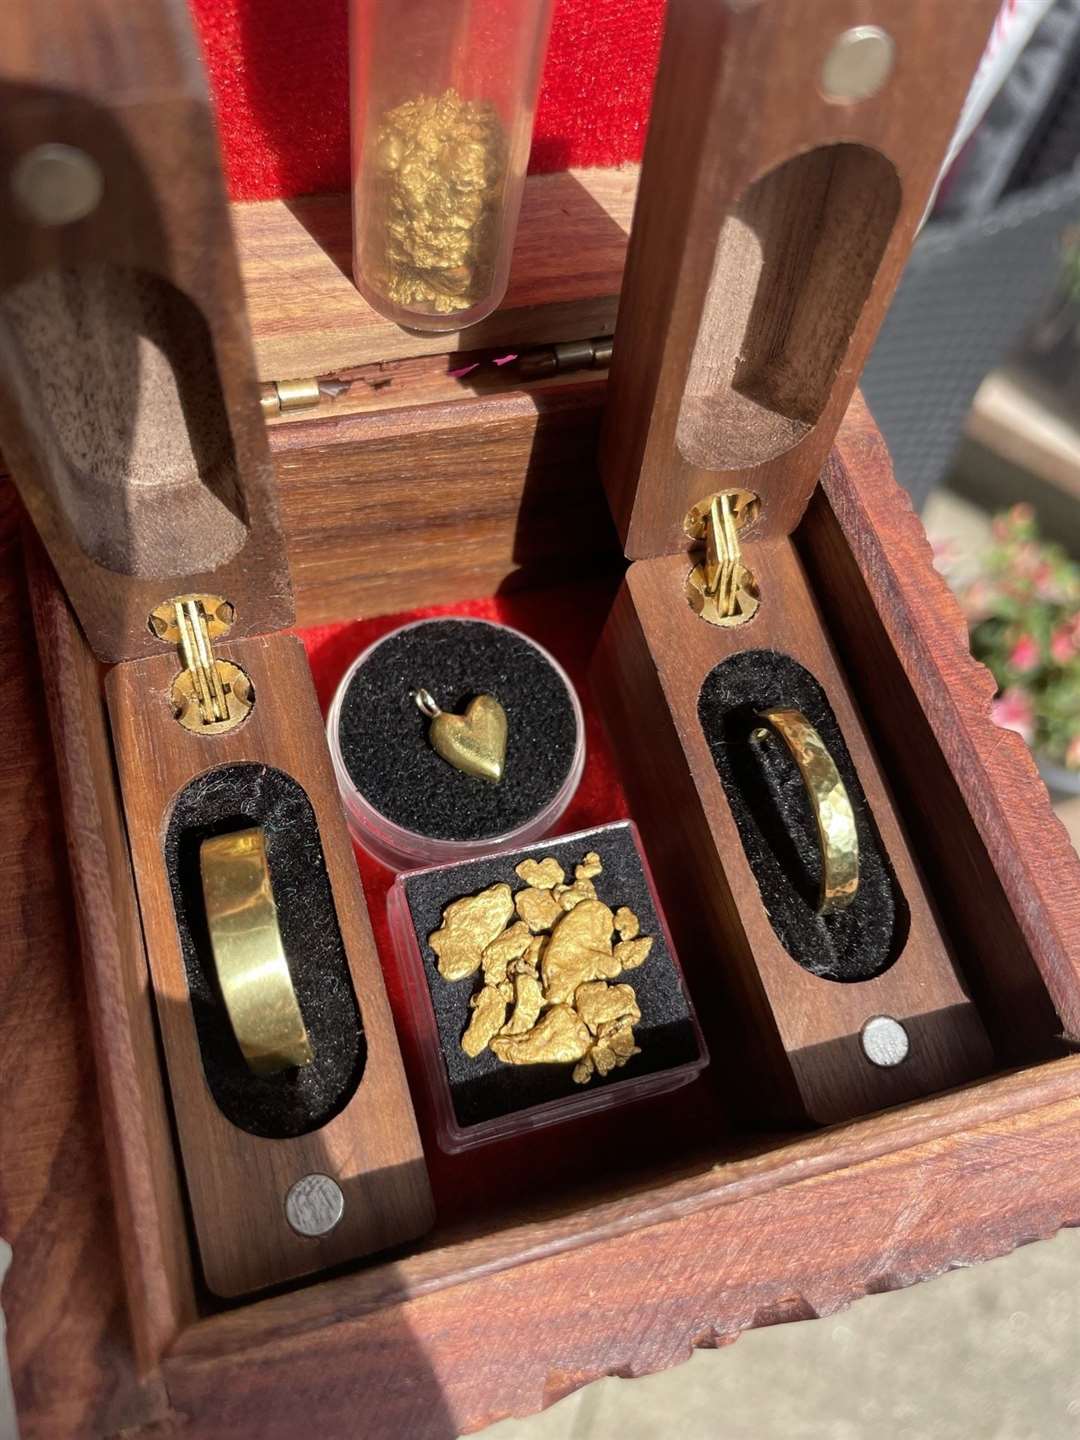 The gold rings and pendant Michael commissioned for his family.